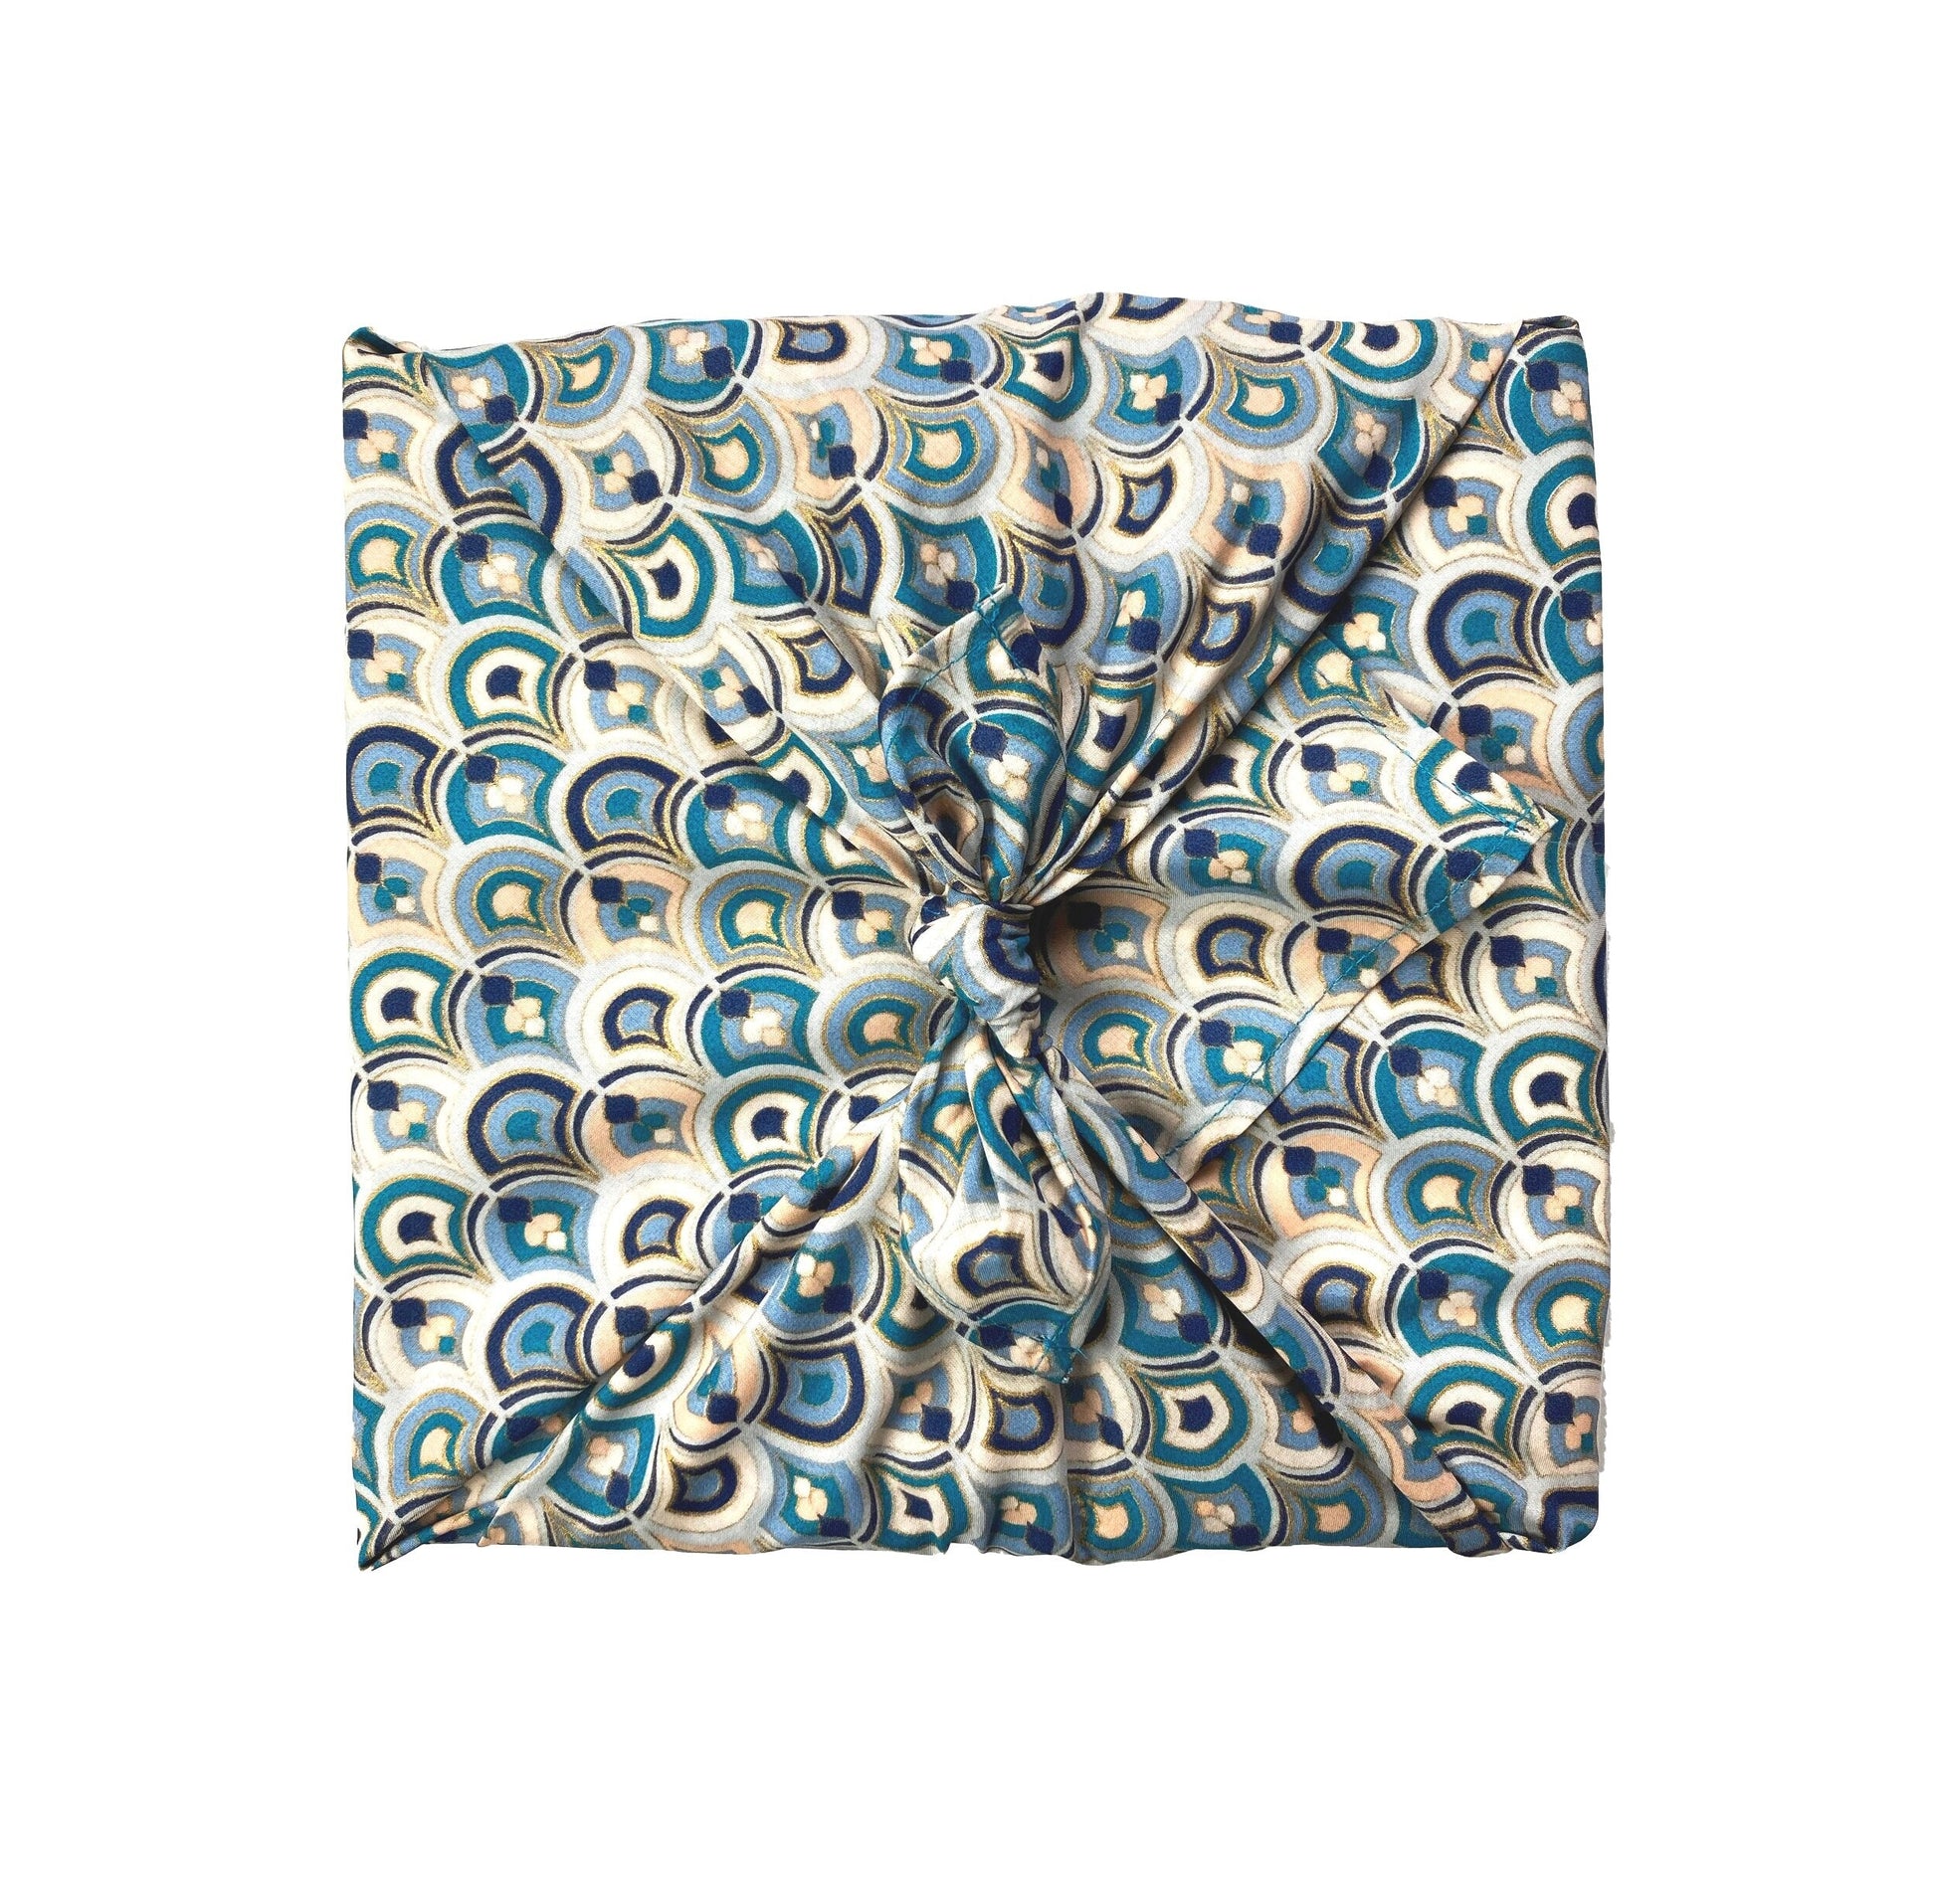 fabric gift wrapping art deco FabRap™